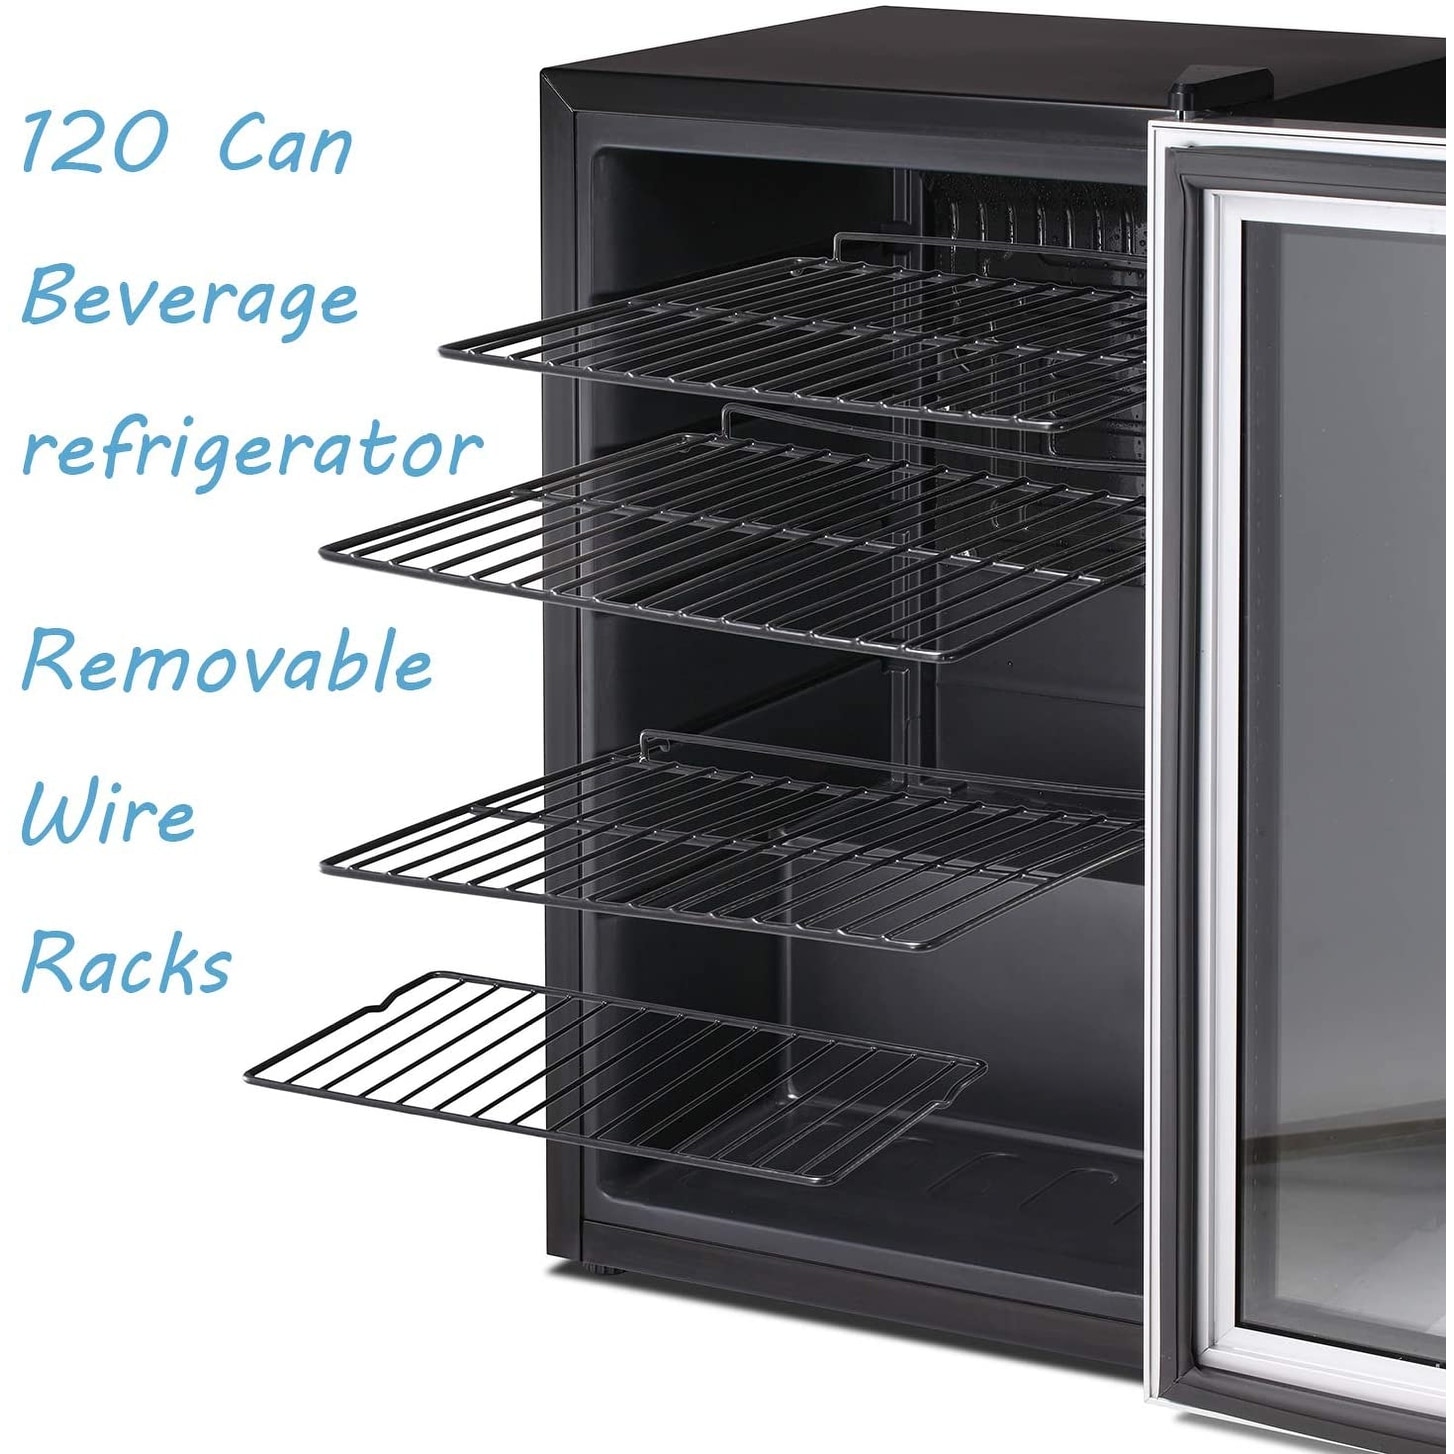 https://ak1.ostkcdn.com/images/products/is/images/direct/7fb815070c9a99ac4c80f1b9d7cfcb4670719500/Star-Beverage-Refrigerator-Cooler-145-Can-Mini-Fridge-Clear-Front.jpg